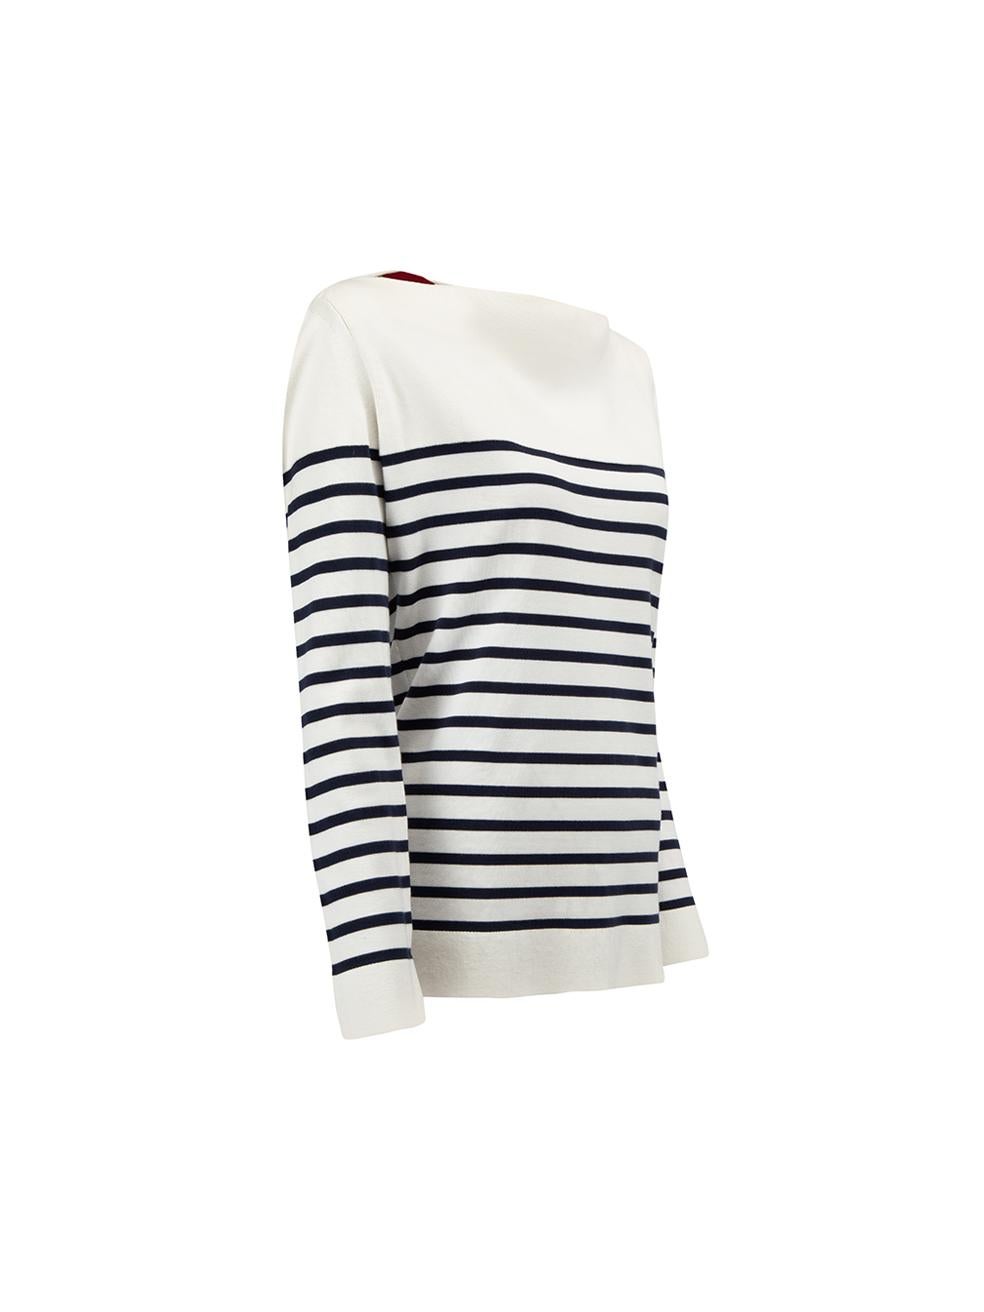 CONDITION is Good. Minor wear to jumper is evident. Light discoloured marks on this used Burberry London designer resale item. 



Details


White and navy

Cotton

Long sleeves jumper

Knitted

Striped pattern

Boat neckline





Made in